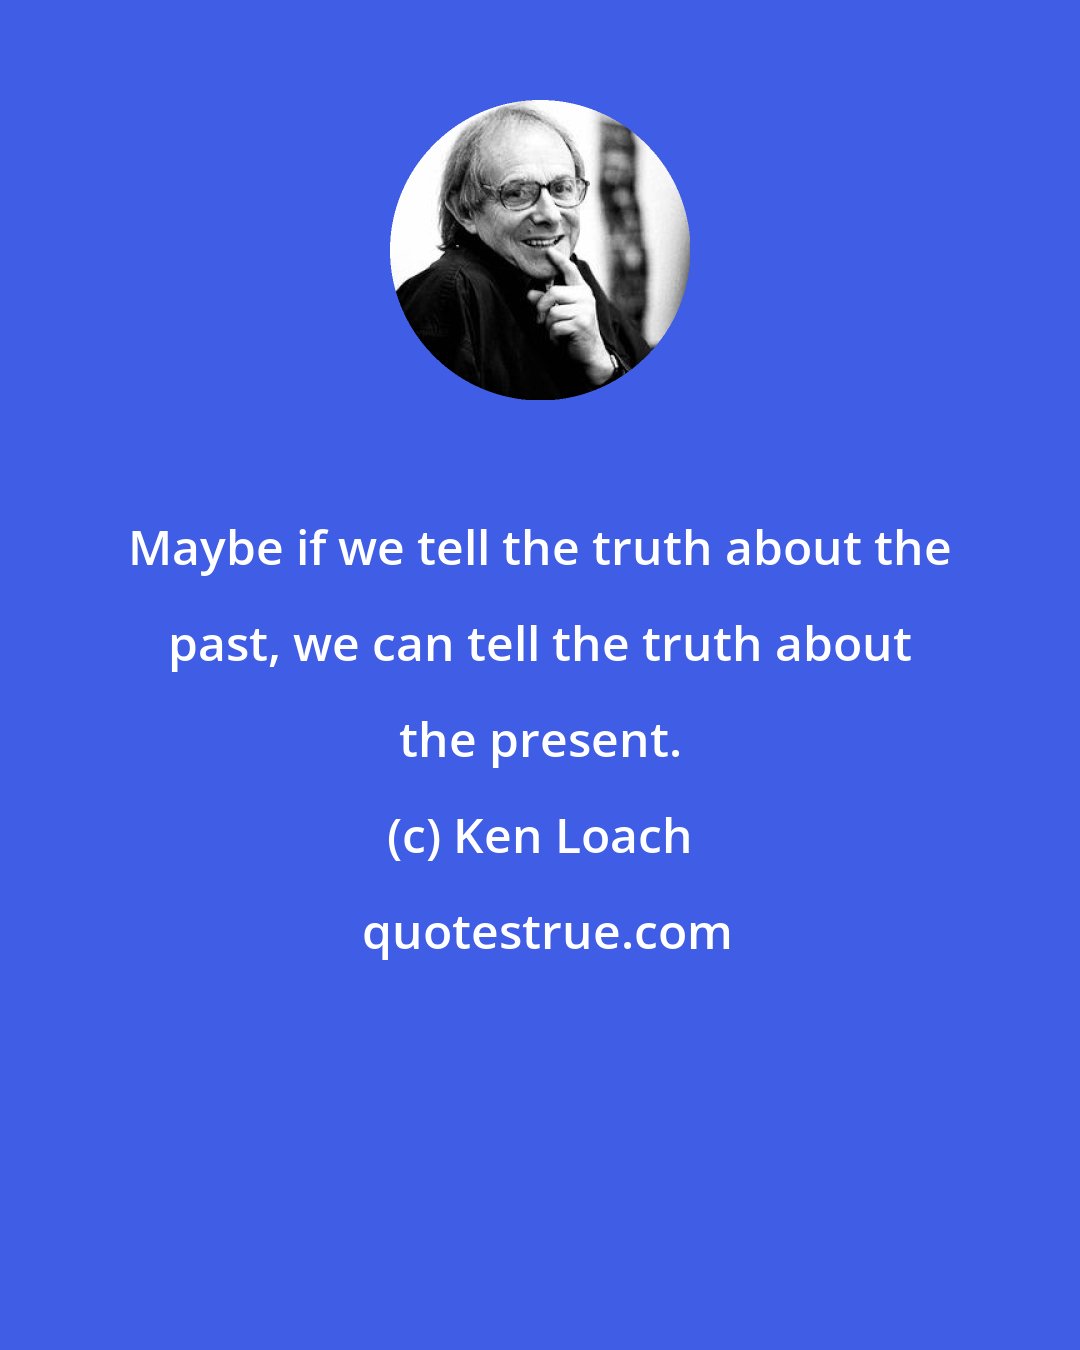 Ken Loach: Maybe if we tell the truth about the past, we can tell the truth about the present.